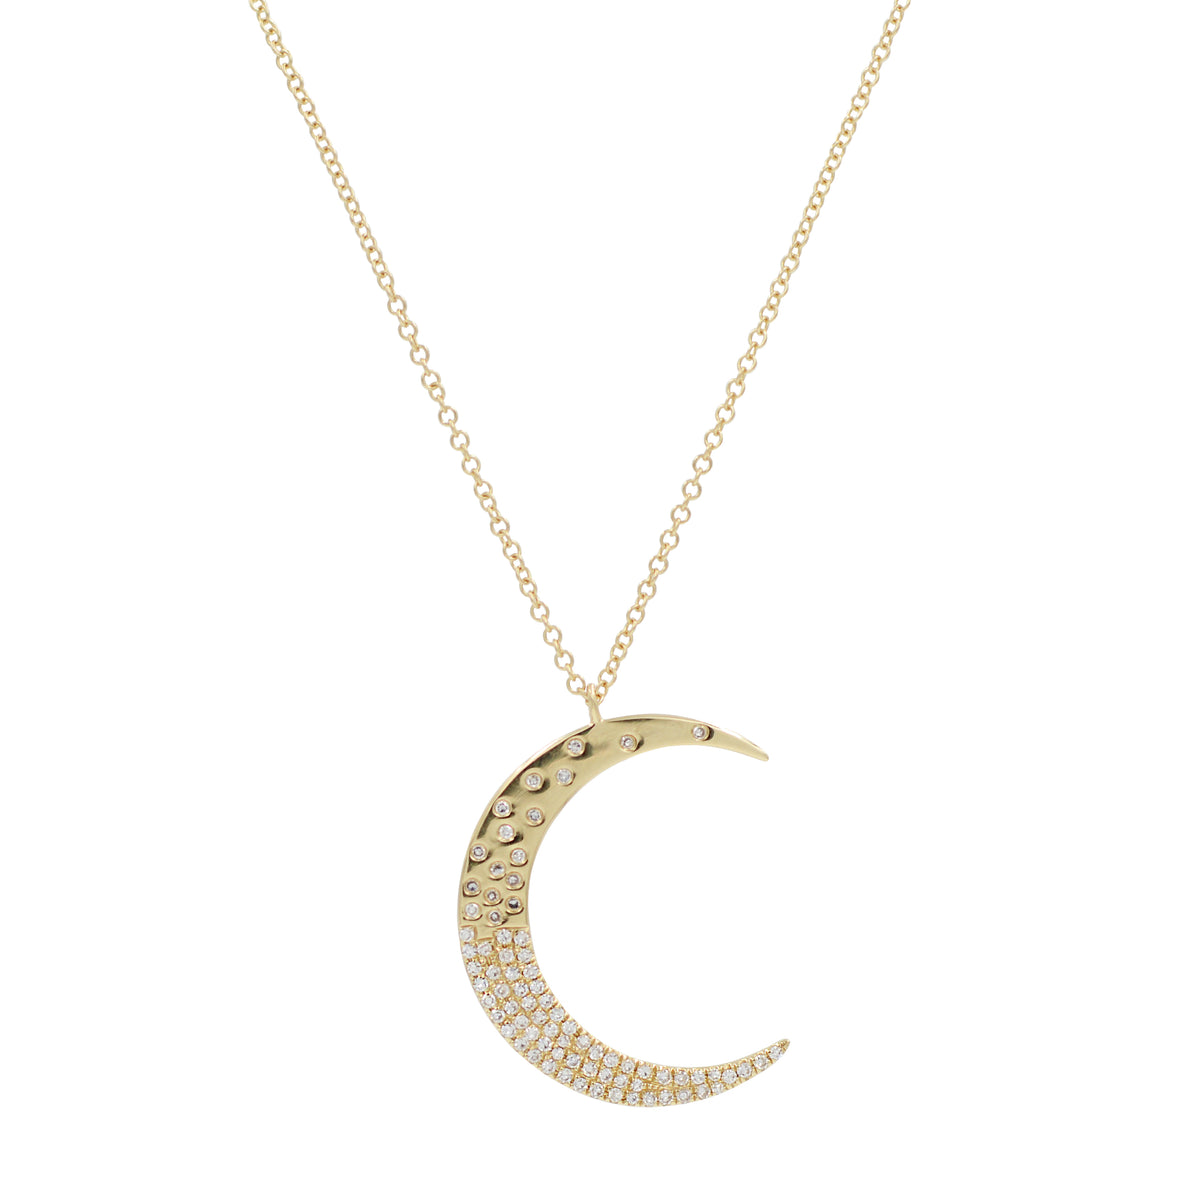 Crescent Moon Necklace With Diamonds in 14k Gold - KAMARIA